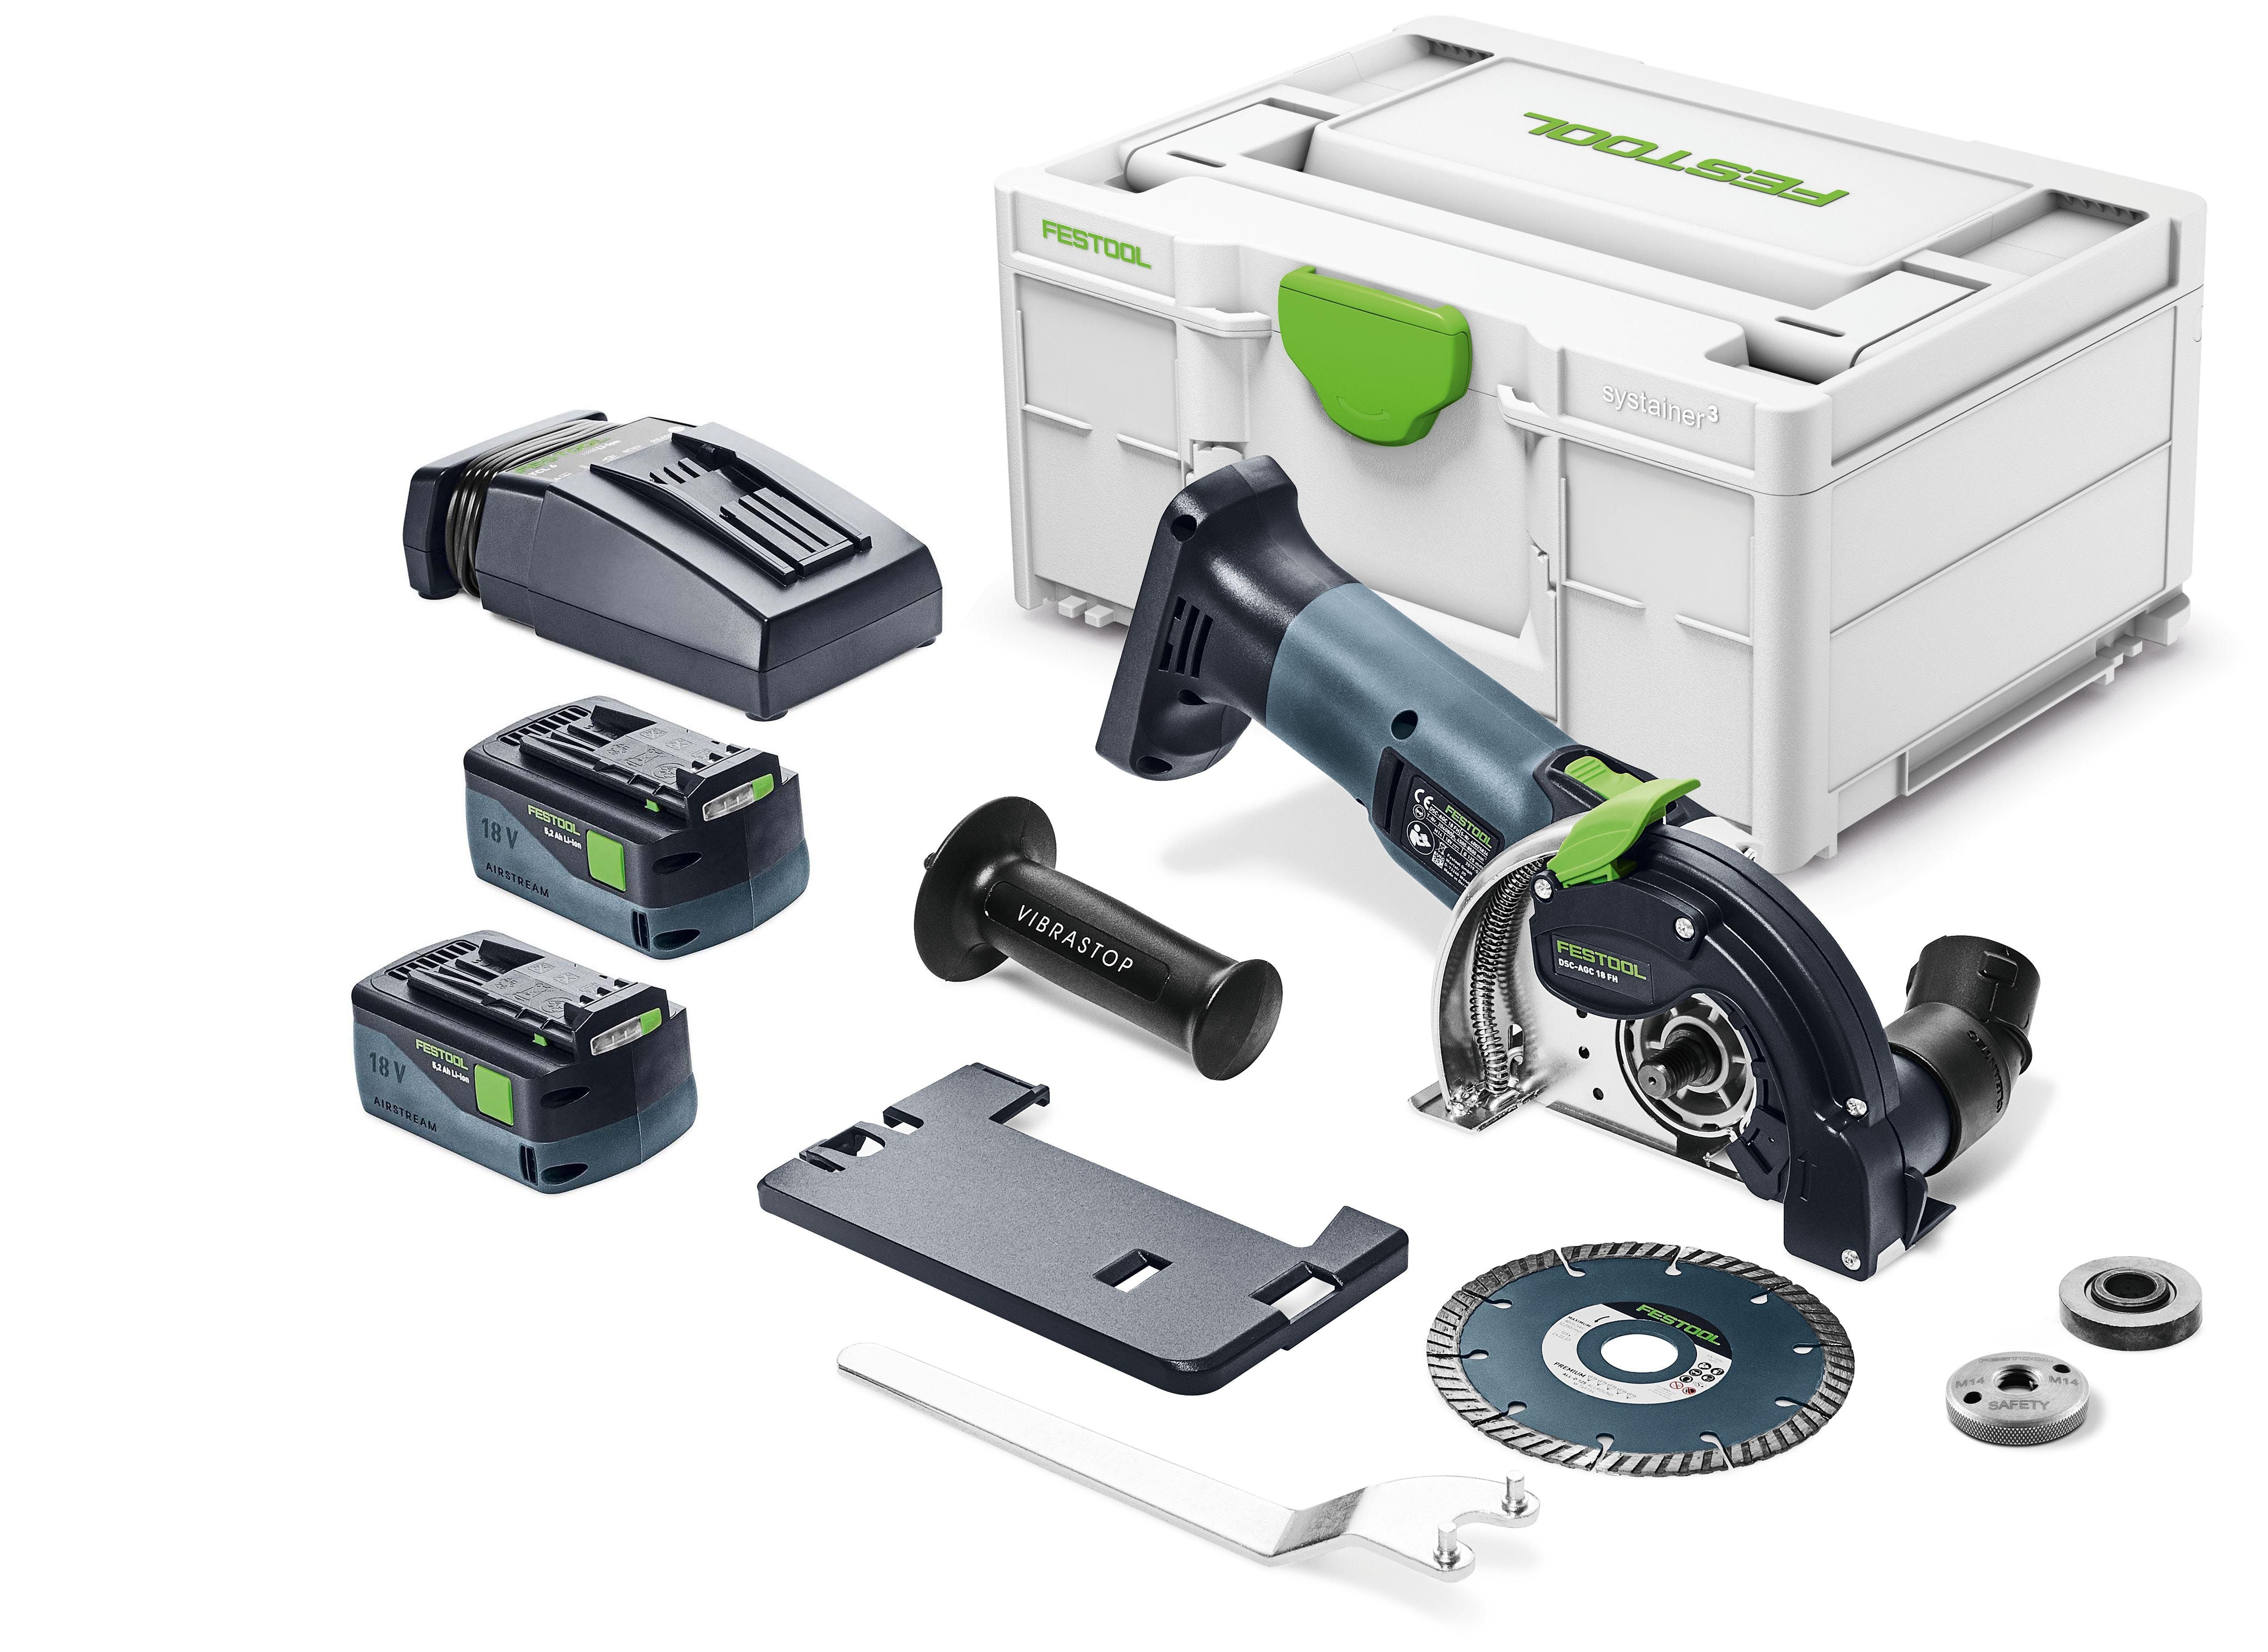 18V 5.2Ah 125mm Cordless Freehand Diamond Cutting System Set in Systainer (DSC-AGC 18-125 FH 5.2Ah EBI-Plus) 577032 by Festool